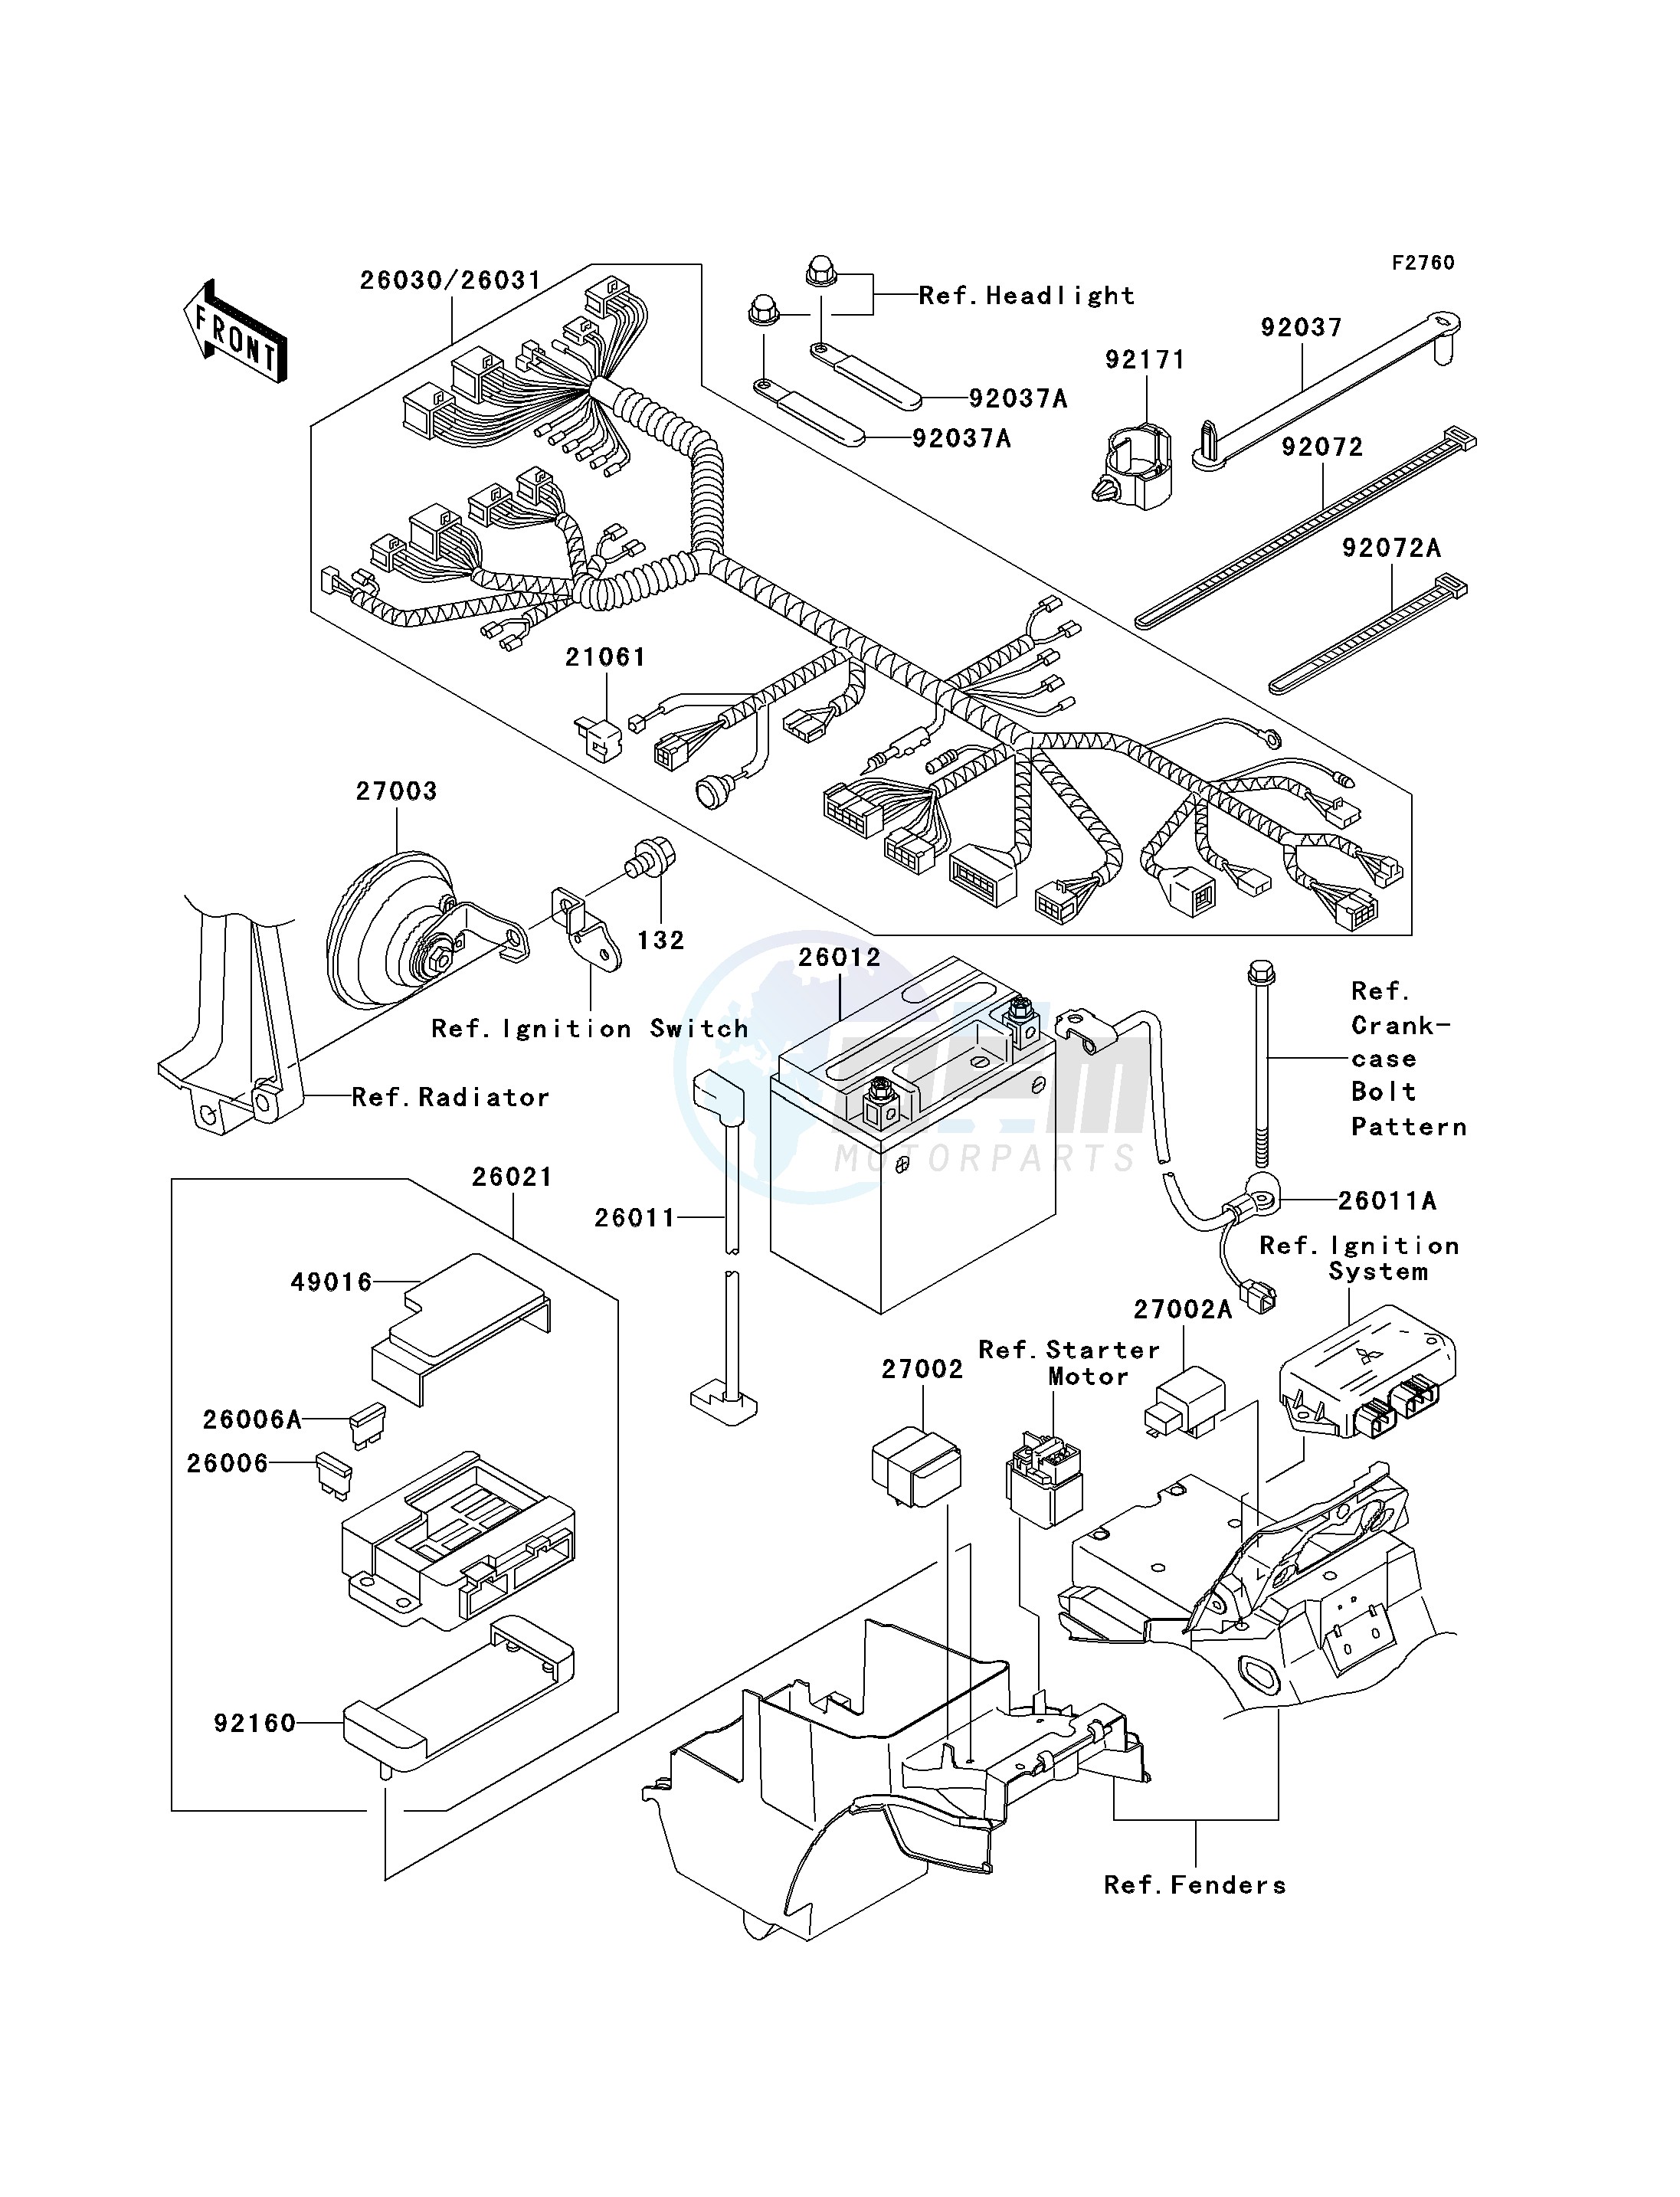 CHASSIS ELECTRICAL EQUIPMENT blueprint